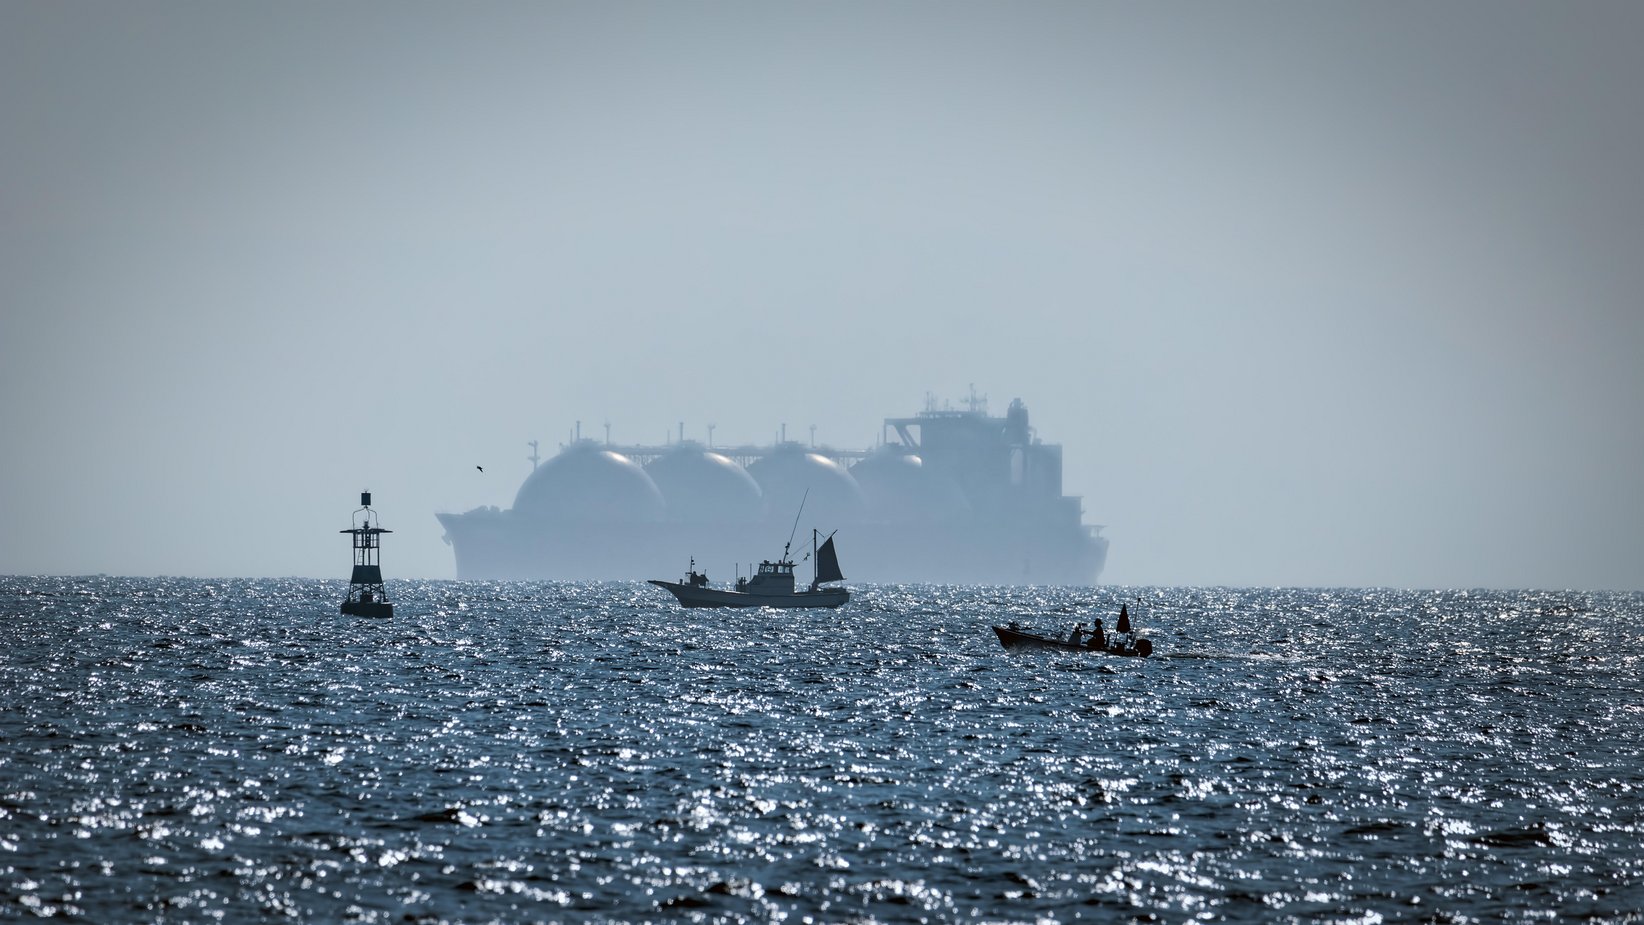 Two fishing boats being over shadowed by a Liquid Natural Gas tanker (LNG) in Japan?s Tokyo Bay.